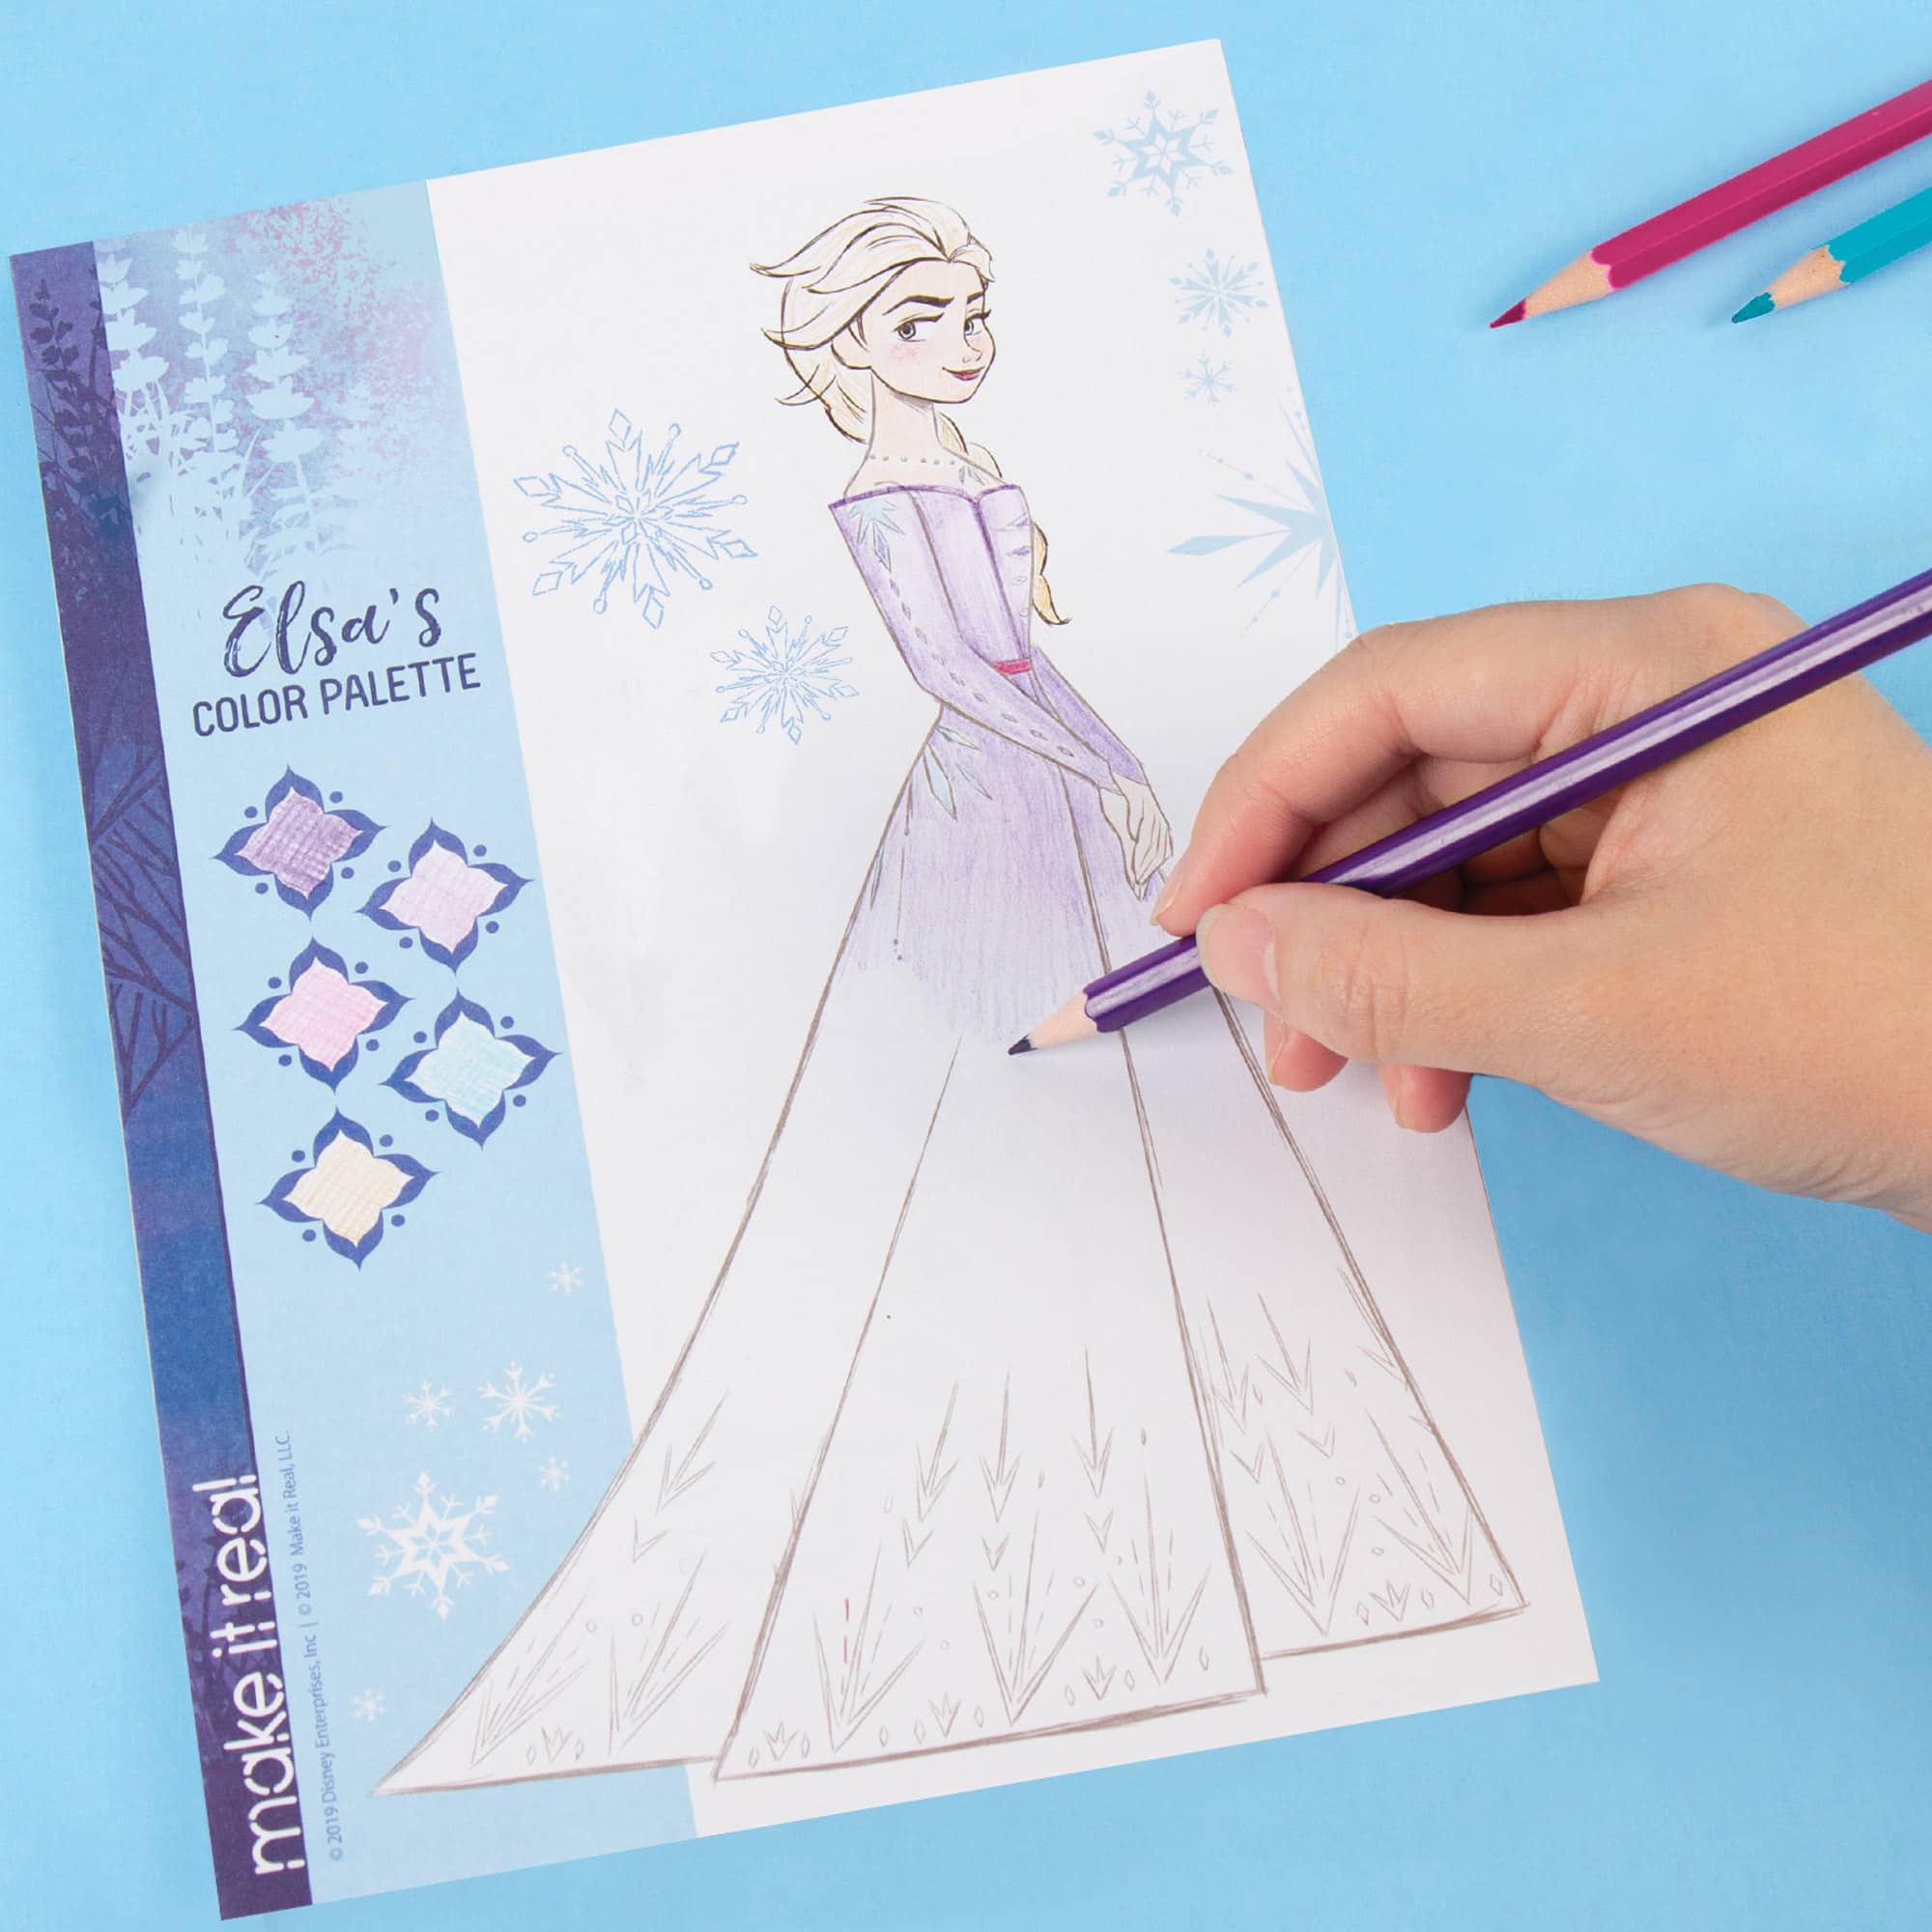 Make It Real - Disney Frozen 2 Fashion Design Tracing Light Table